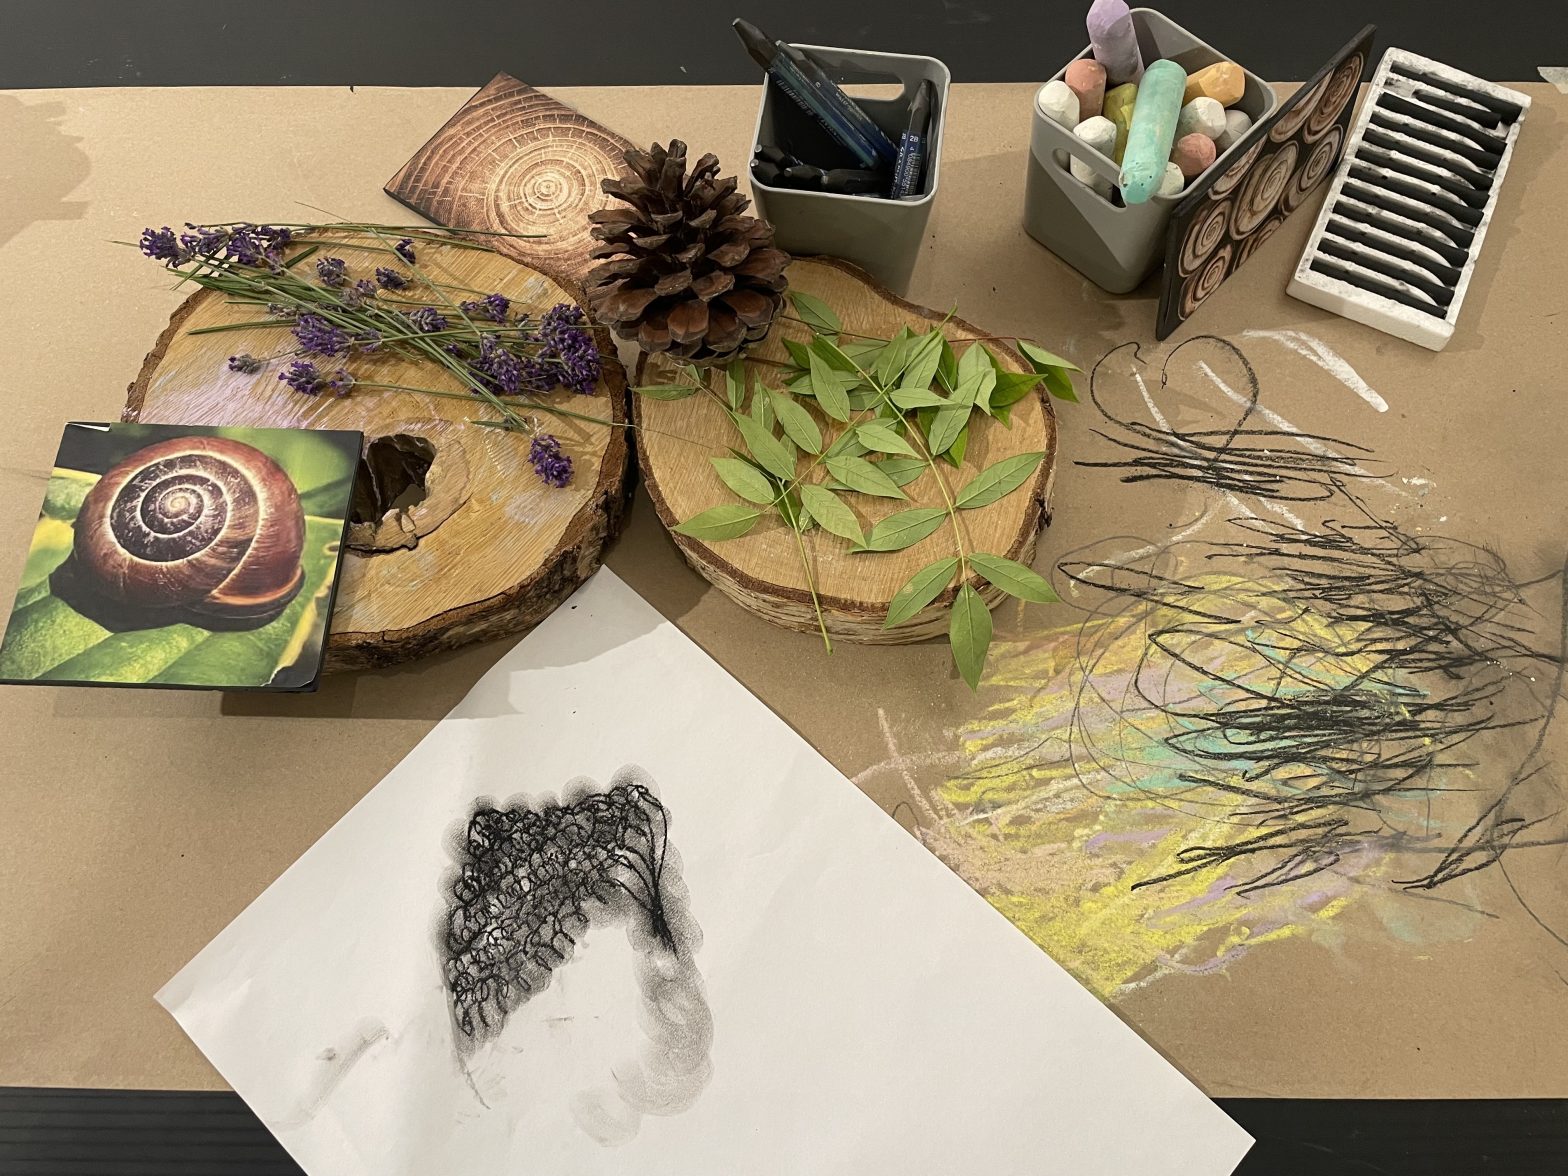 A series of leaves and pinecones arranged on a table. There is a charcoal sketch of a leaf on a piece of paper next to them.